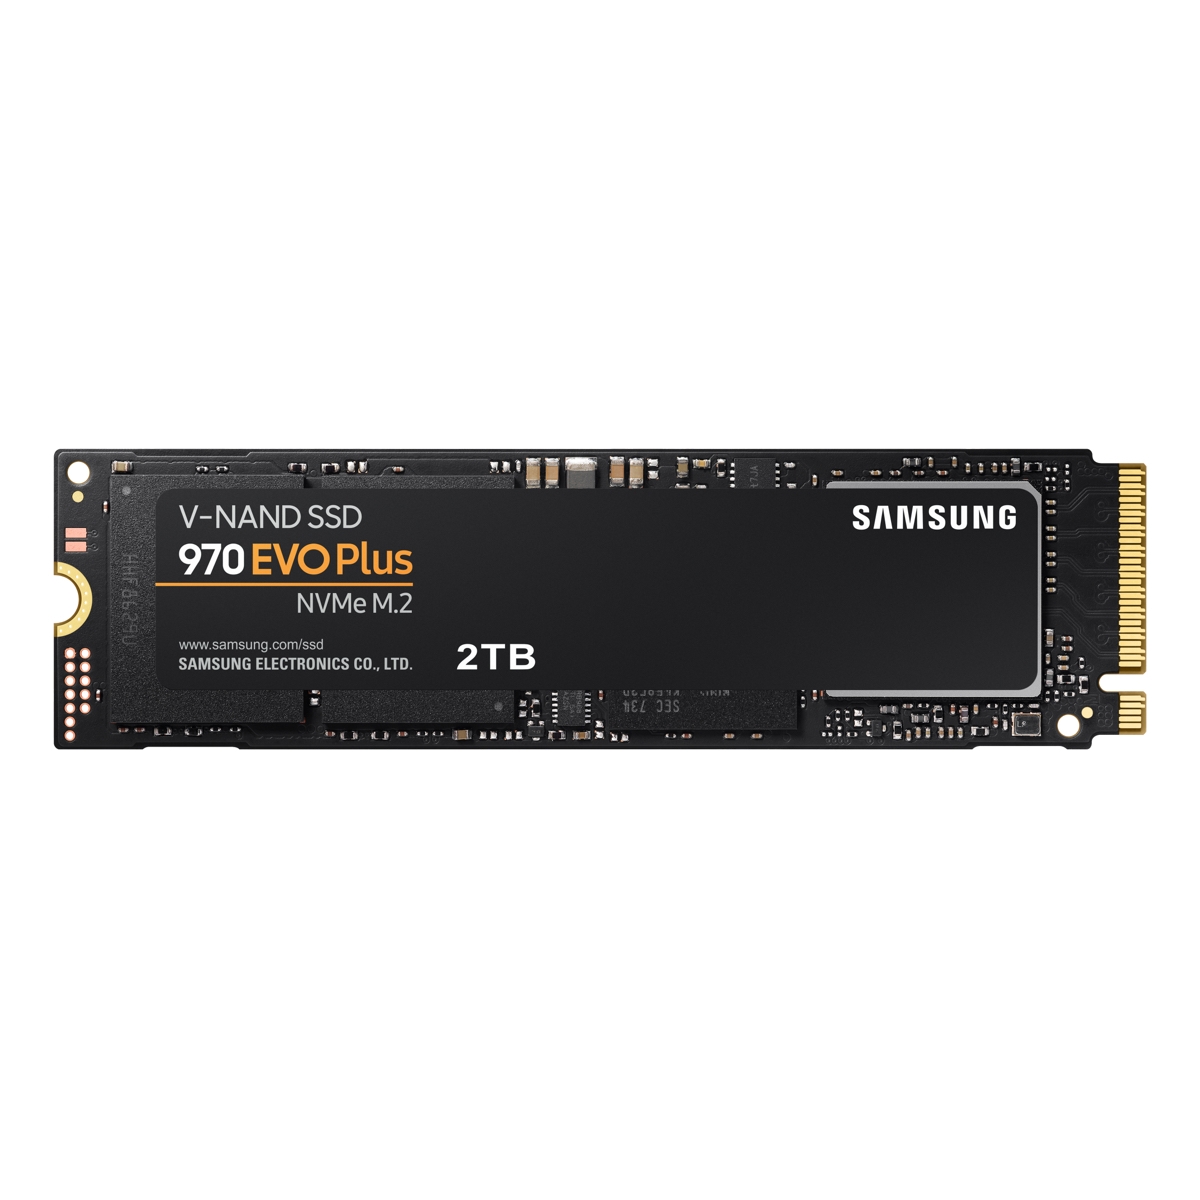 970 EVO Plus Series Client SSD MZ-V7S2T0 Support & Manual